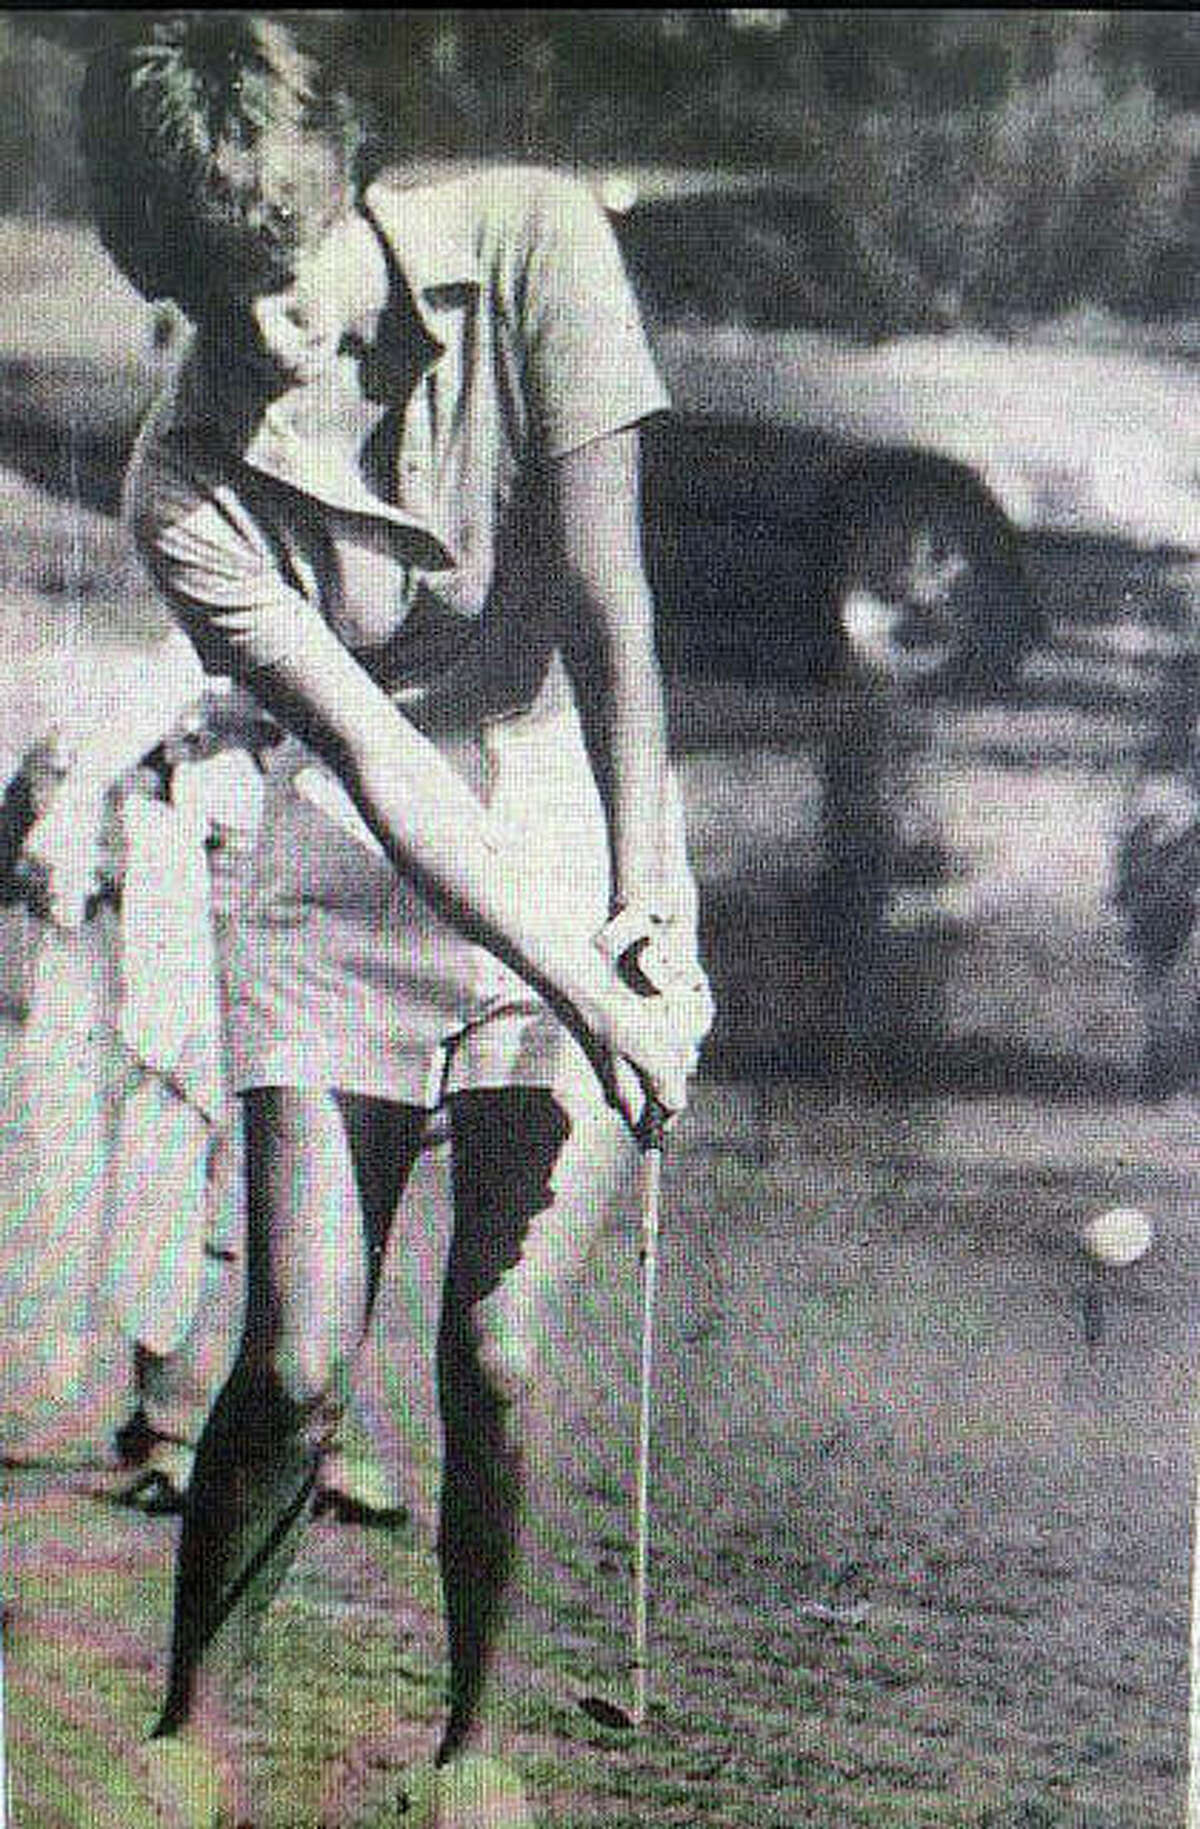 Edwardsville’s Barb Anderson capped her high school career with a second-place finish in the girls state tournament in 1979.